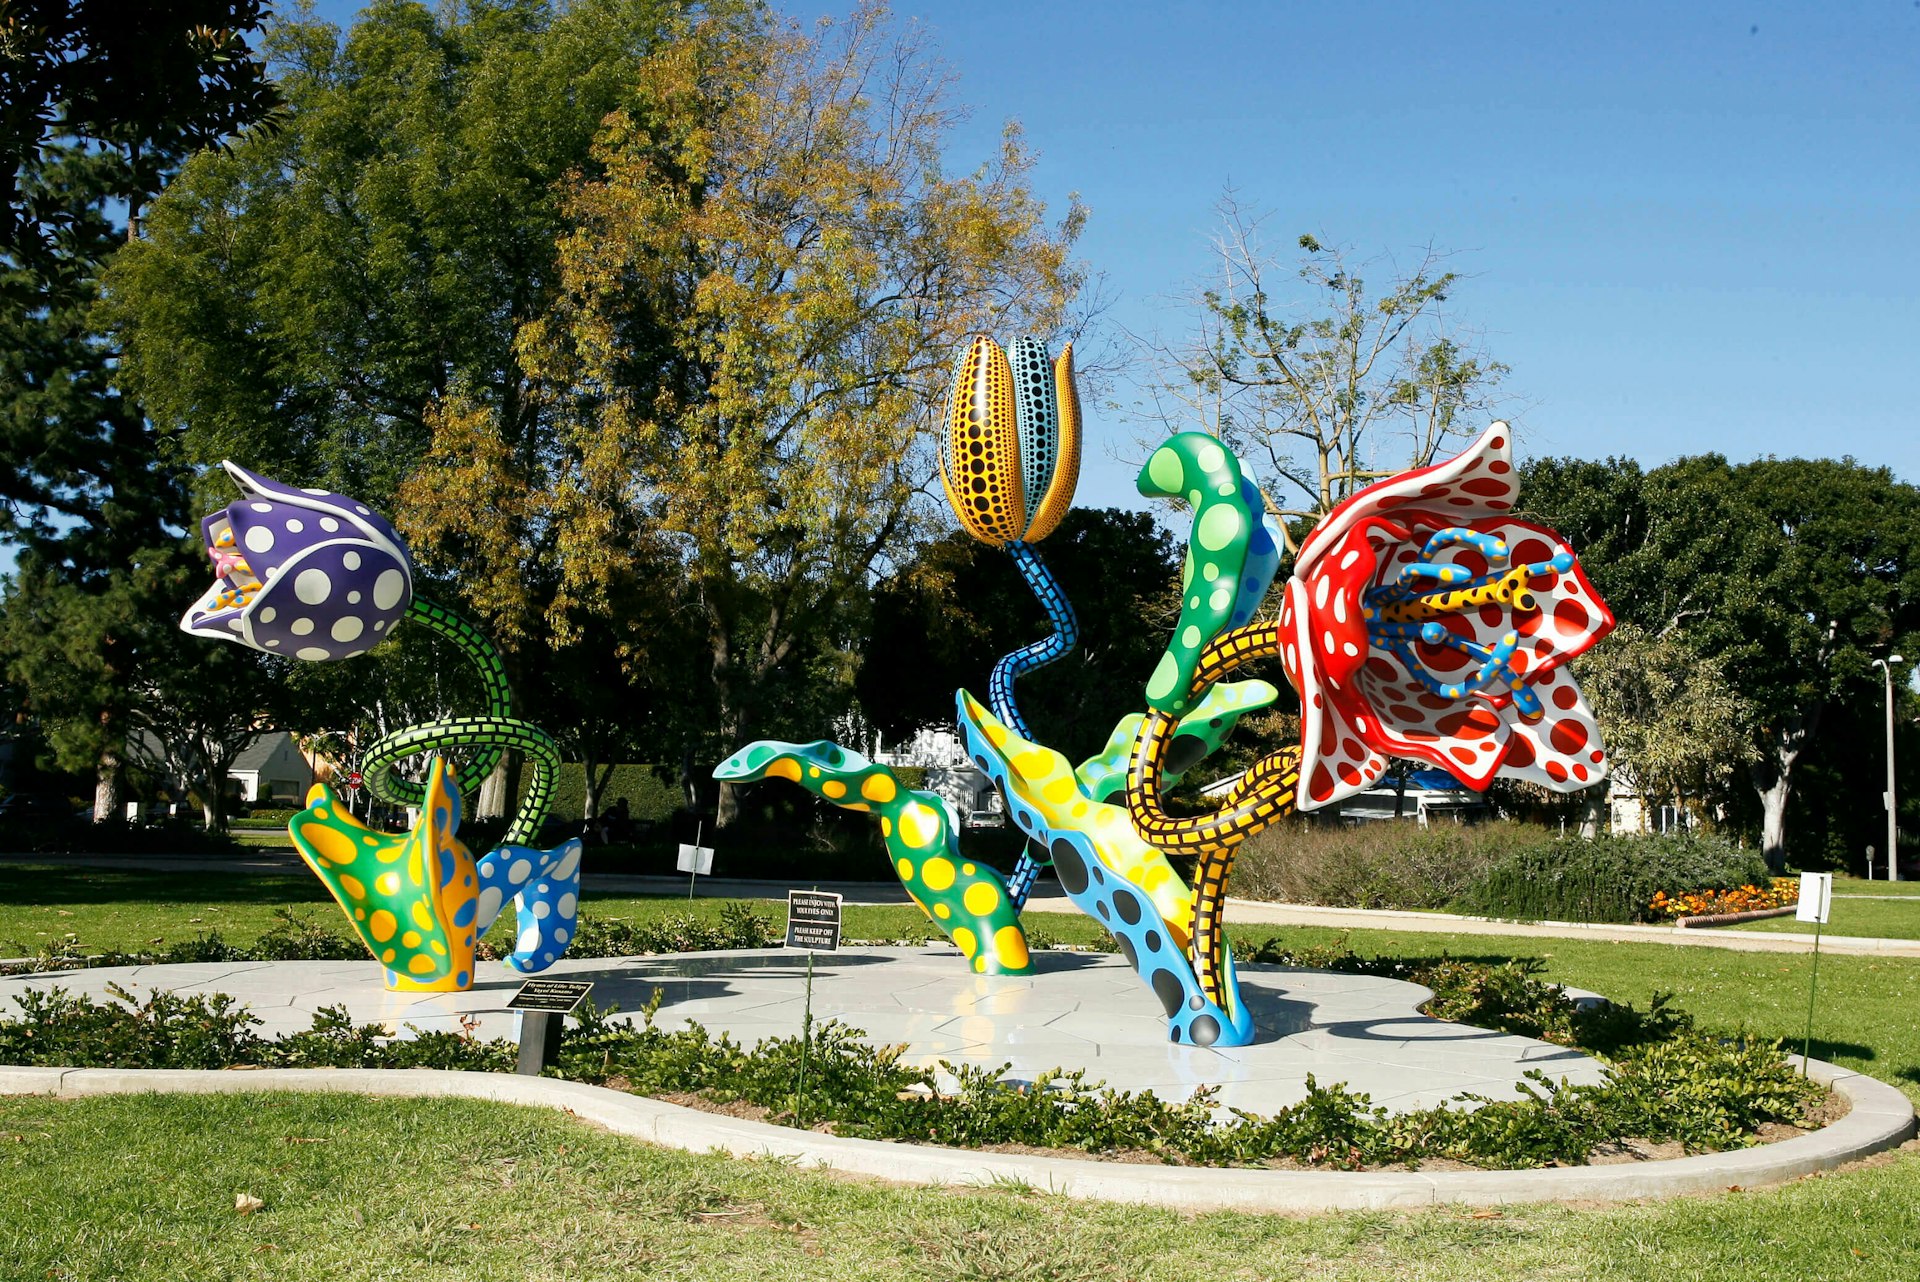 Kusama's colorful flower sculptures in a green park on a sunny day